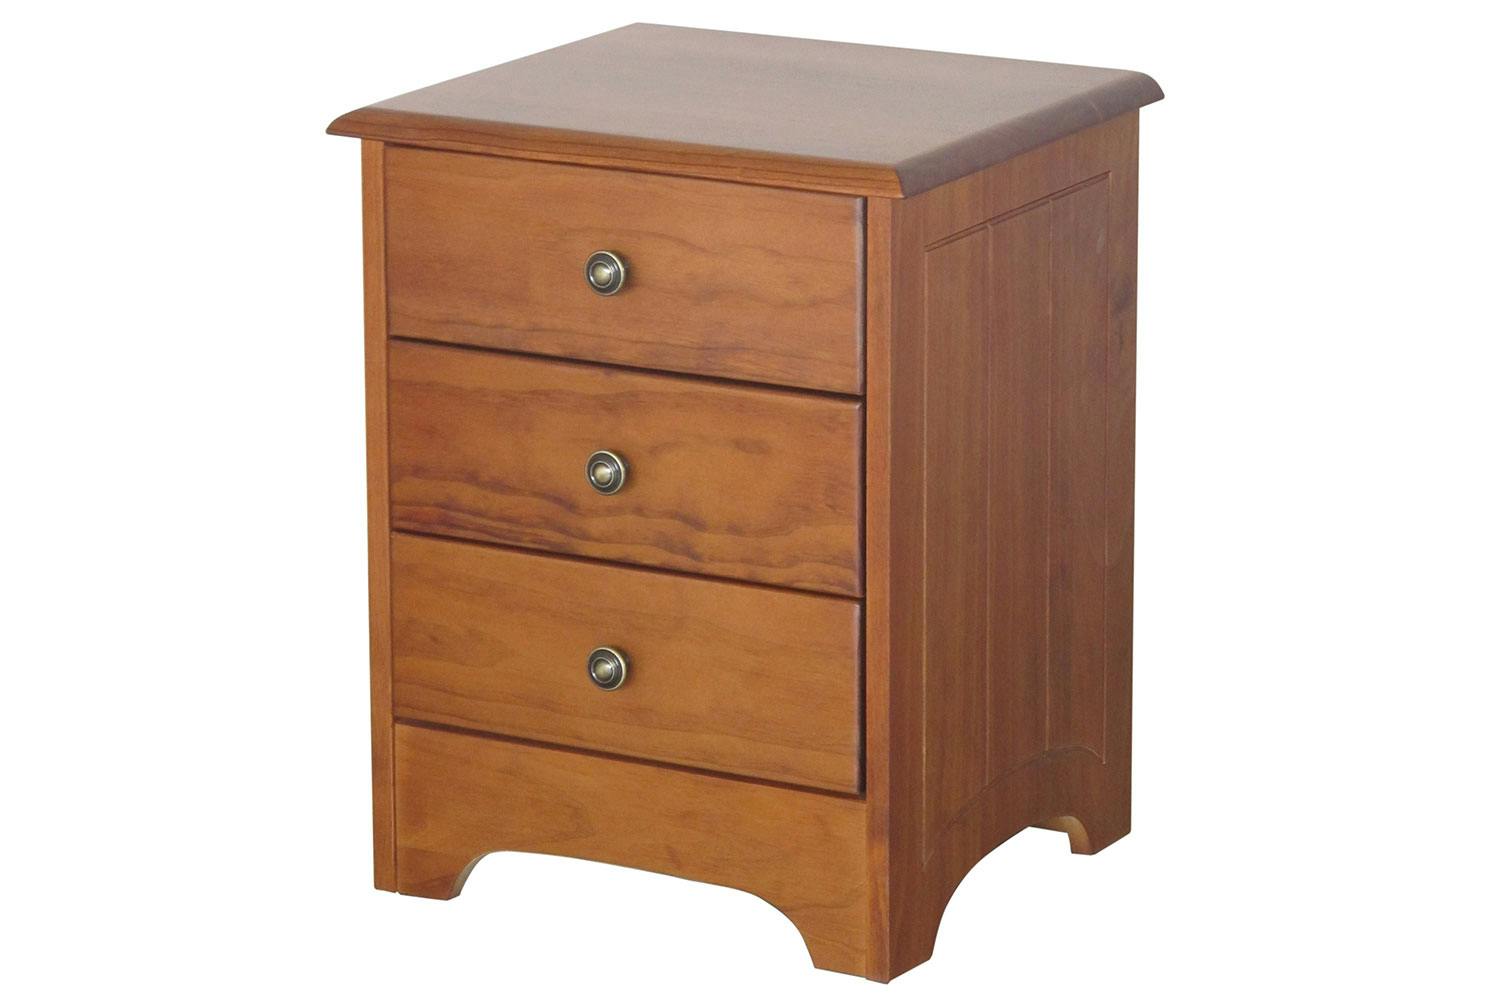 Calais 3 Drawer Bedside Table by Coastwood Furniture